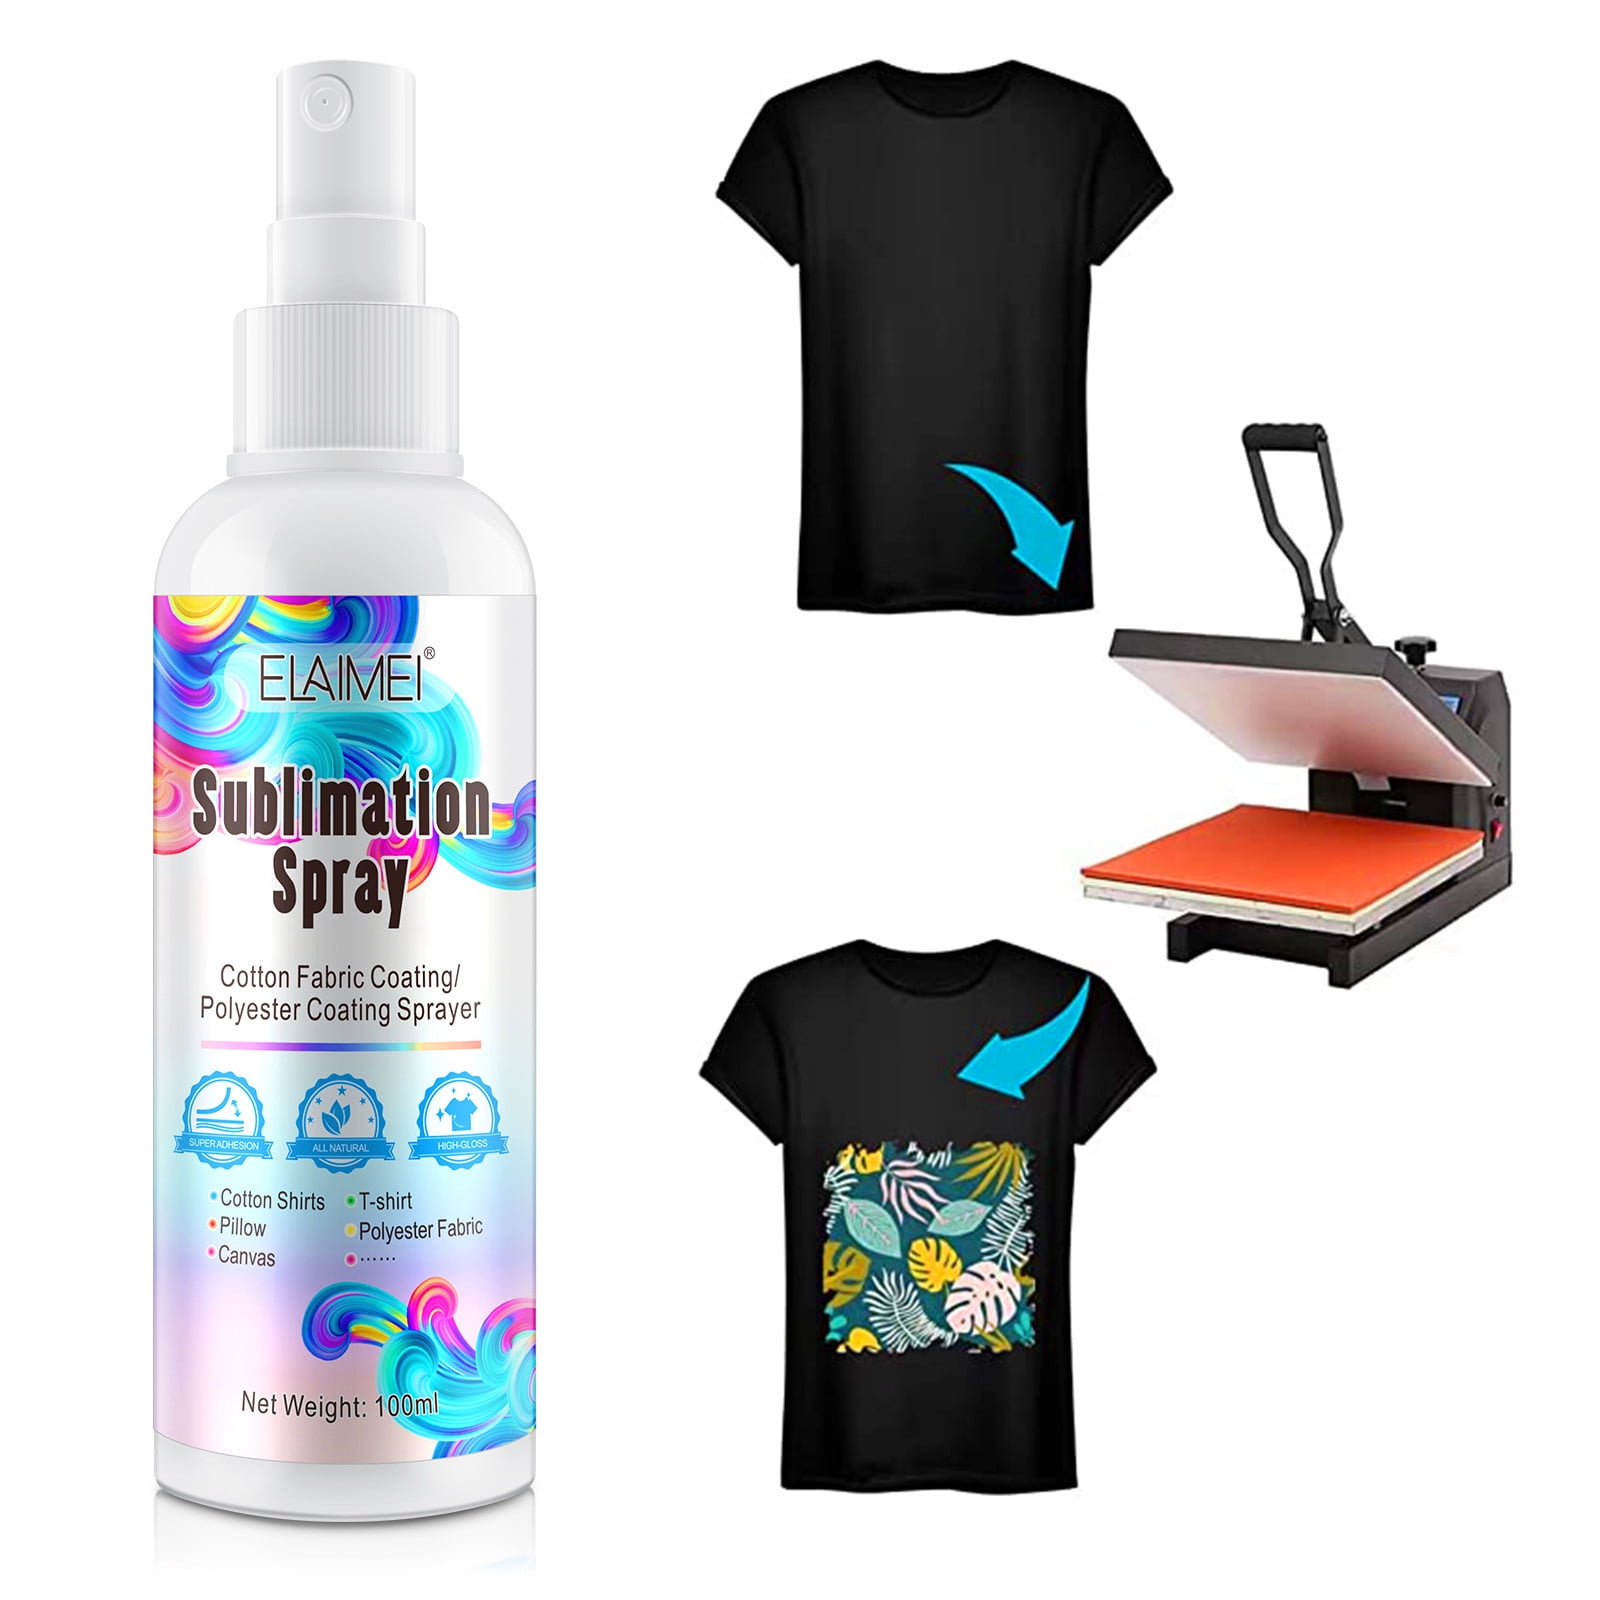 Subli+Mate Sublimation Spray for Cotton and Cotton/Polyester Blends.